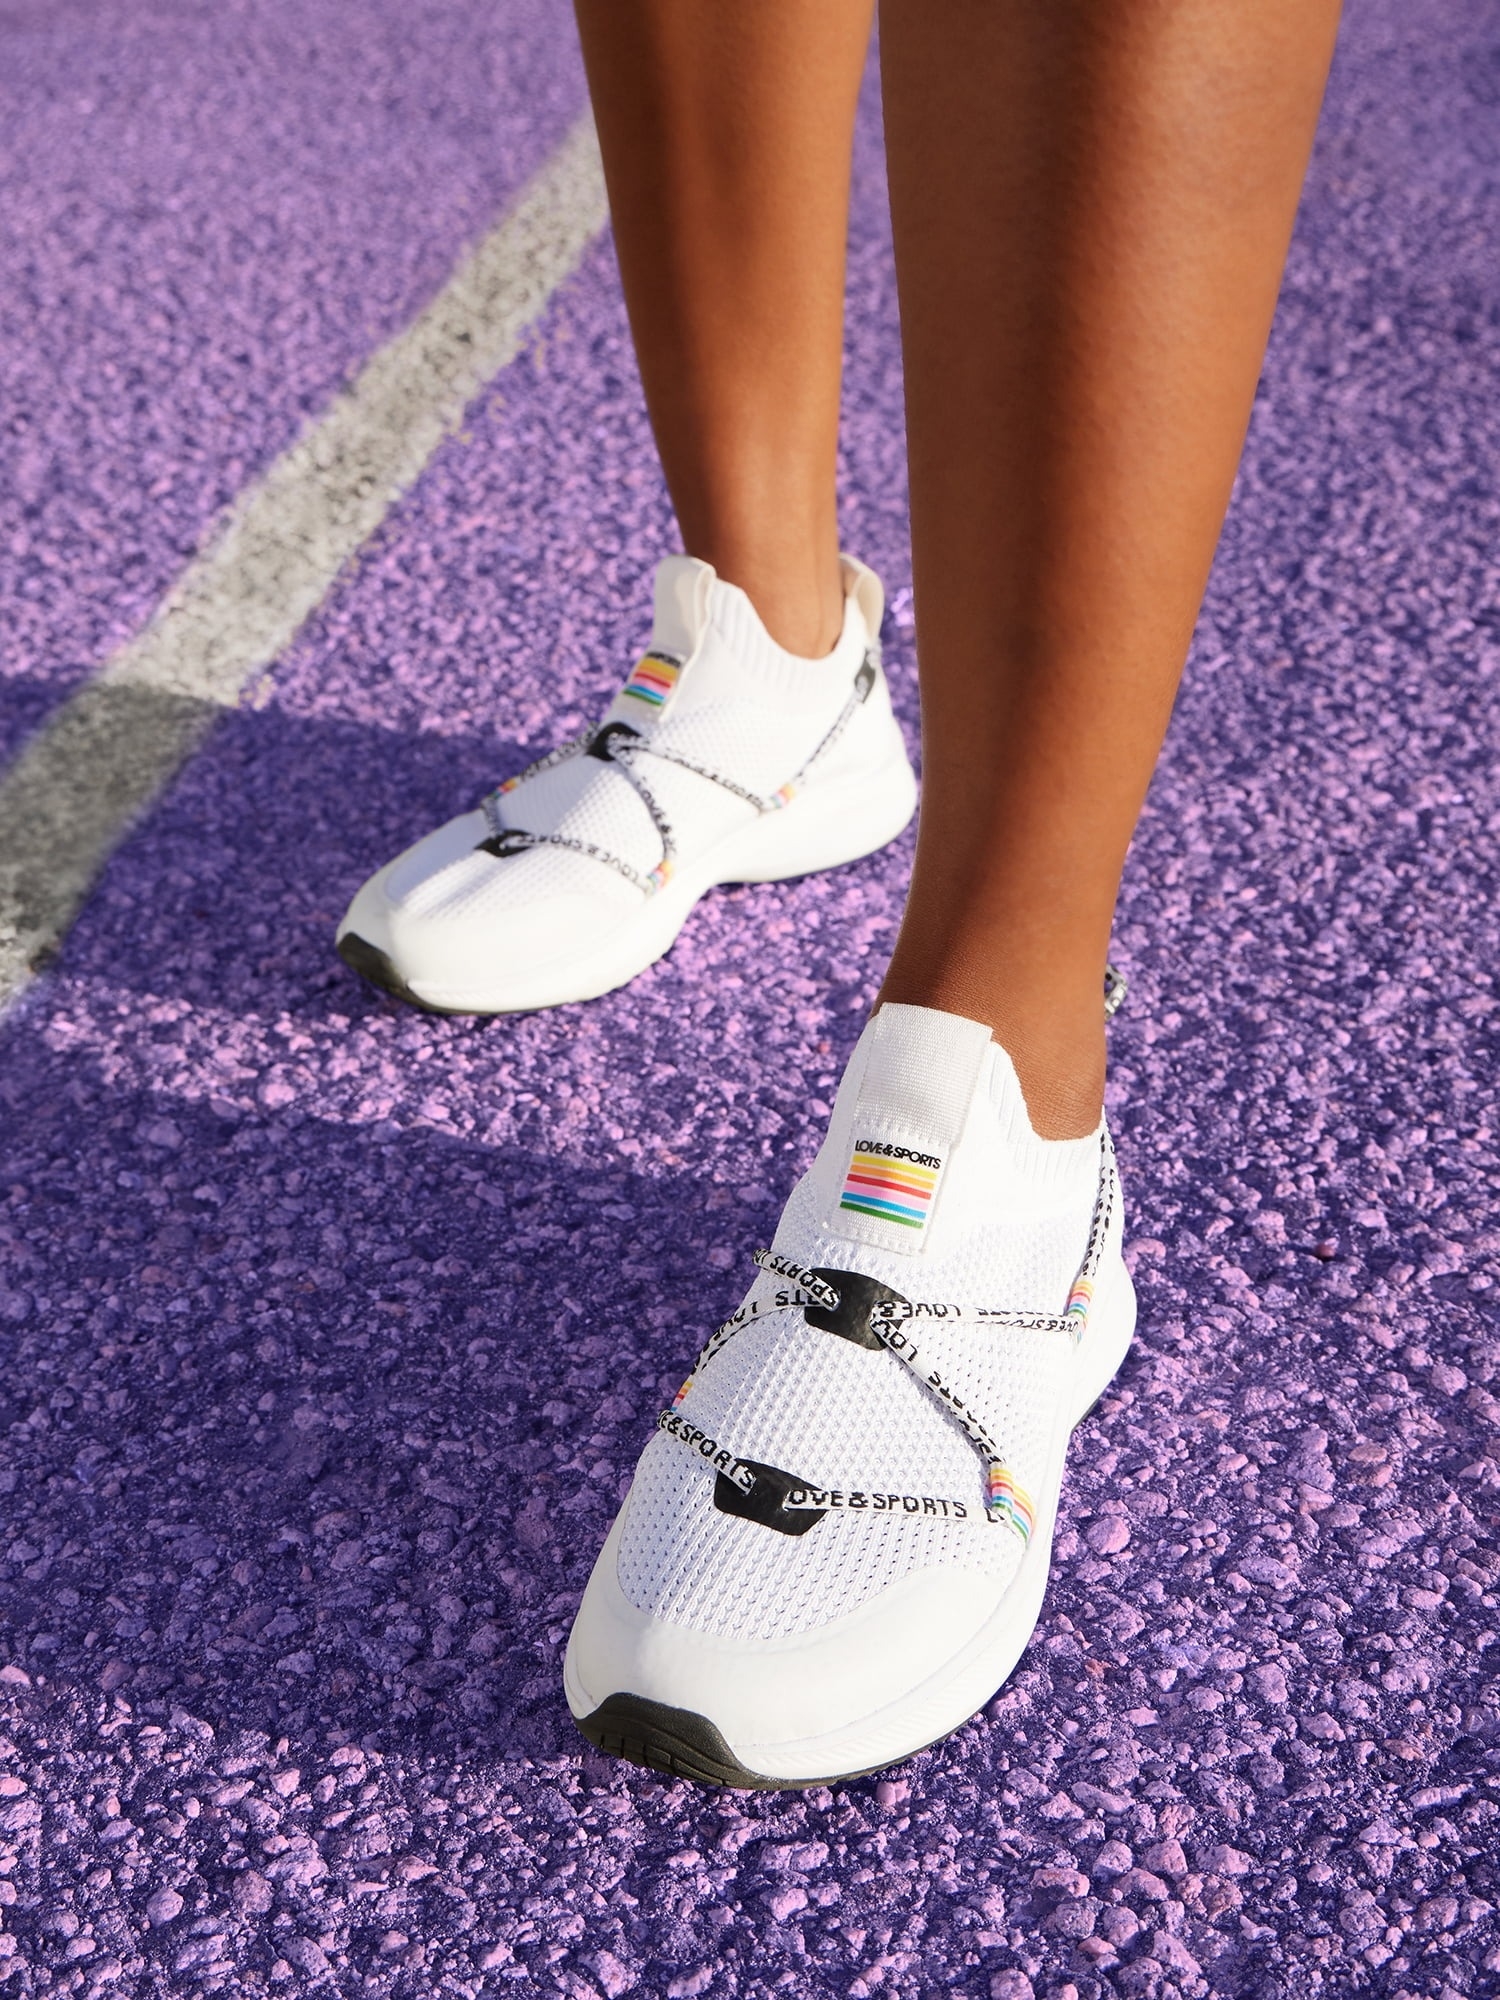 a model wearing the white, black and rainbow sneakers on a purple tennis court